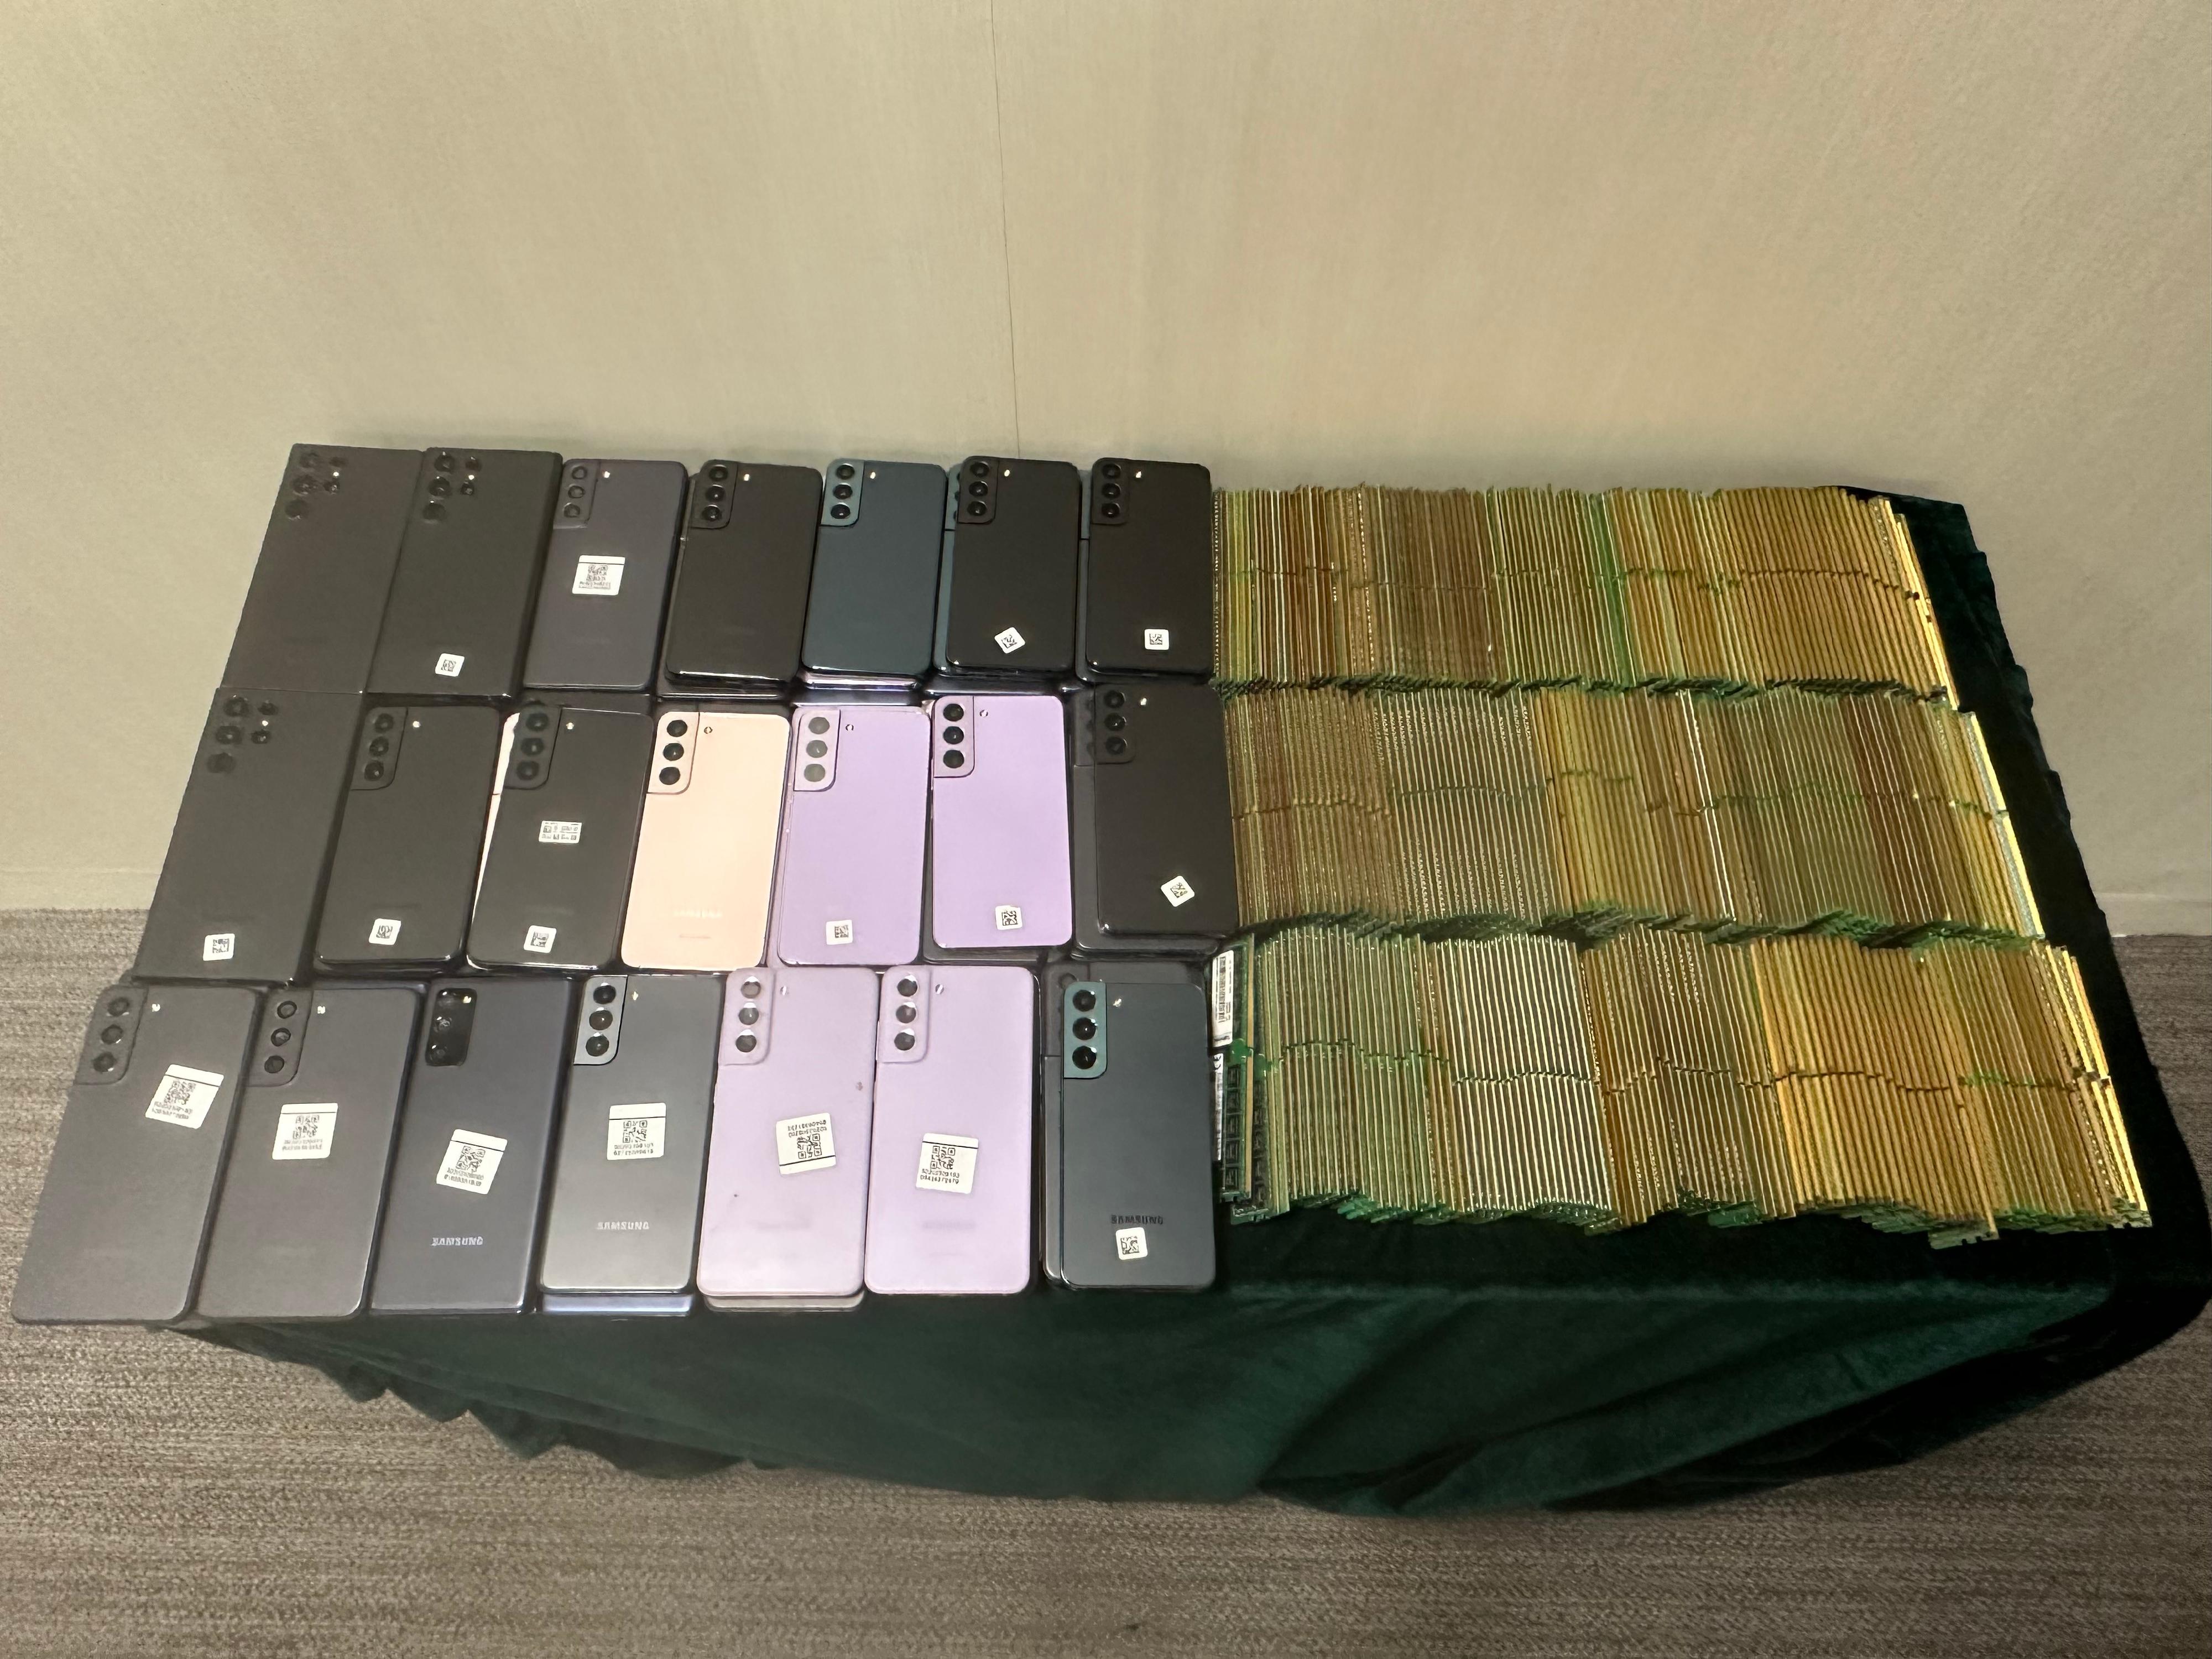 Hong Kong Customs yesterday (October 16) detected a suspected smuggling case involving a medium goods vehicle at the Lok Ma Chau Control Point and seized 195 suspected smuggled mobile phones and 681 suspected smuggled computer RAM units with a total estimated market value of about $1.36 million. Photo shows some of the suspected smuggled mobile phones and suspected smuggled computer RAM units seized.

